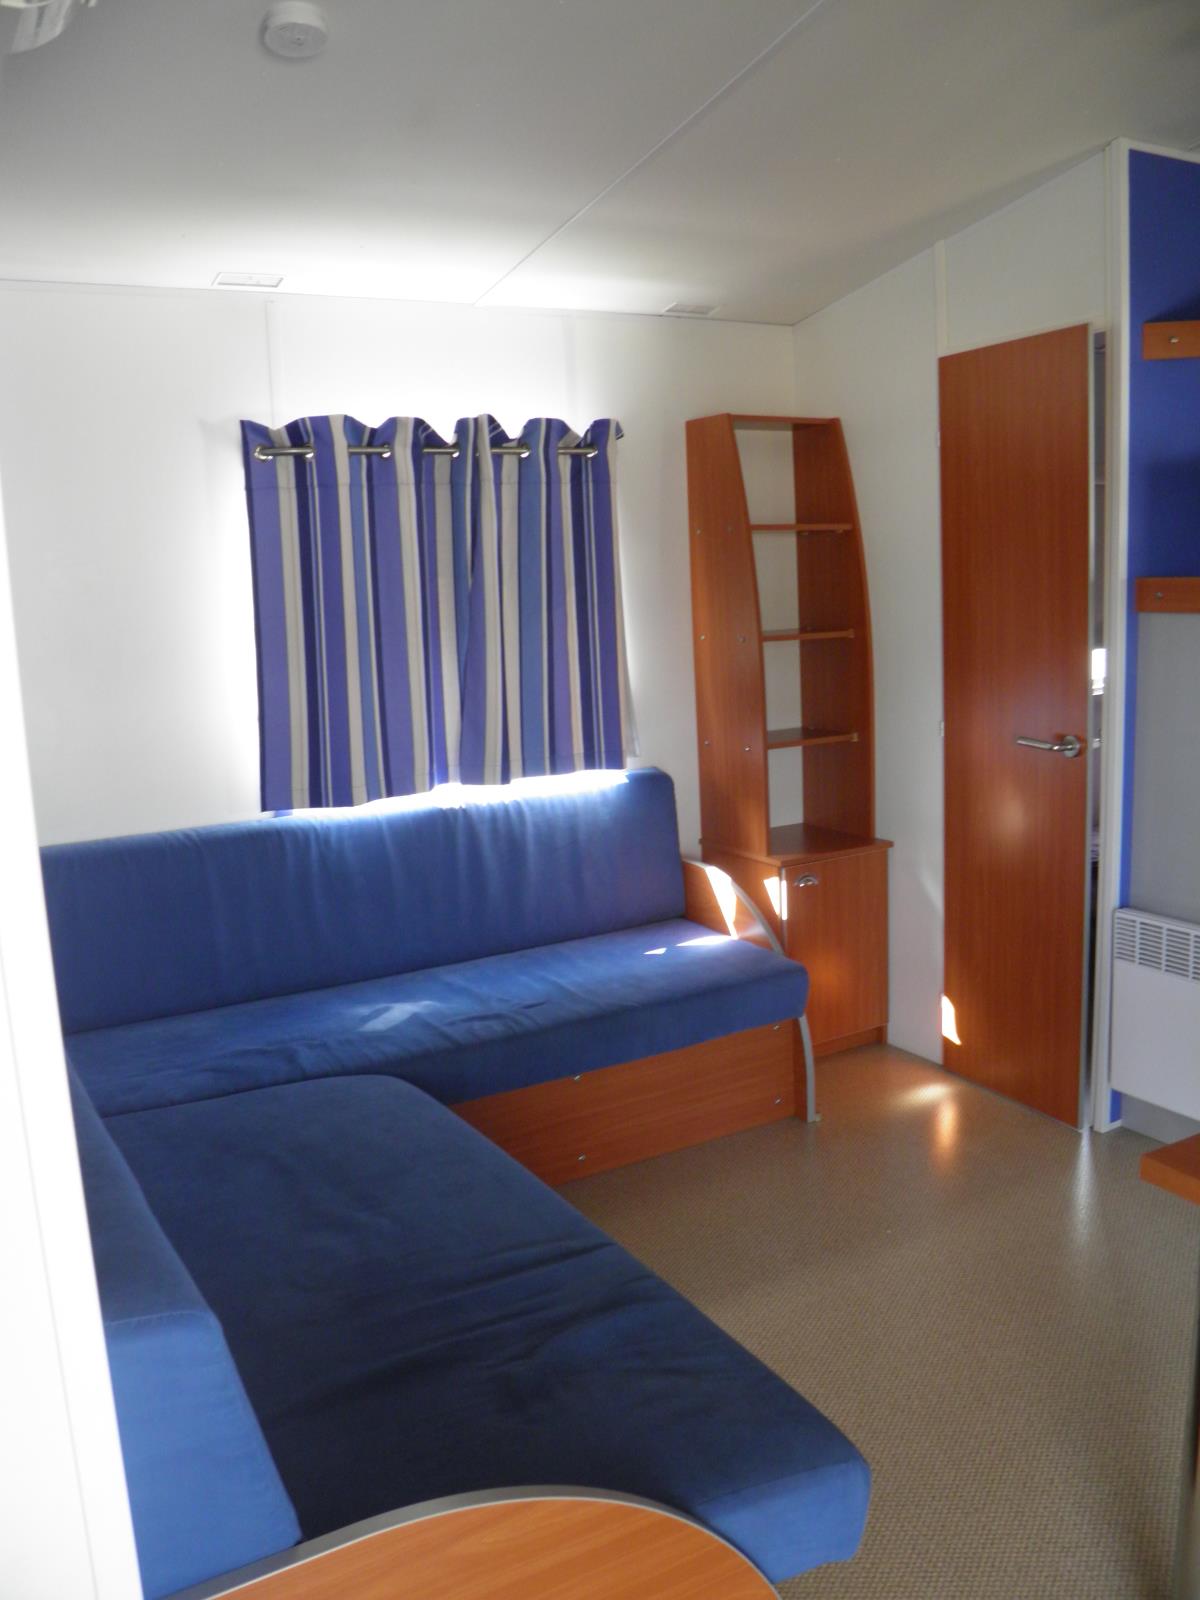 Huuraccommodatie - Ib Mobile Home Loft Rapidhome 30M² + Airconditioning 2 Kamers - Camping Le Sous-Bois